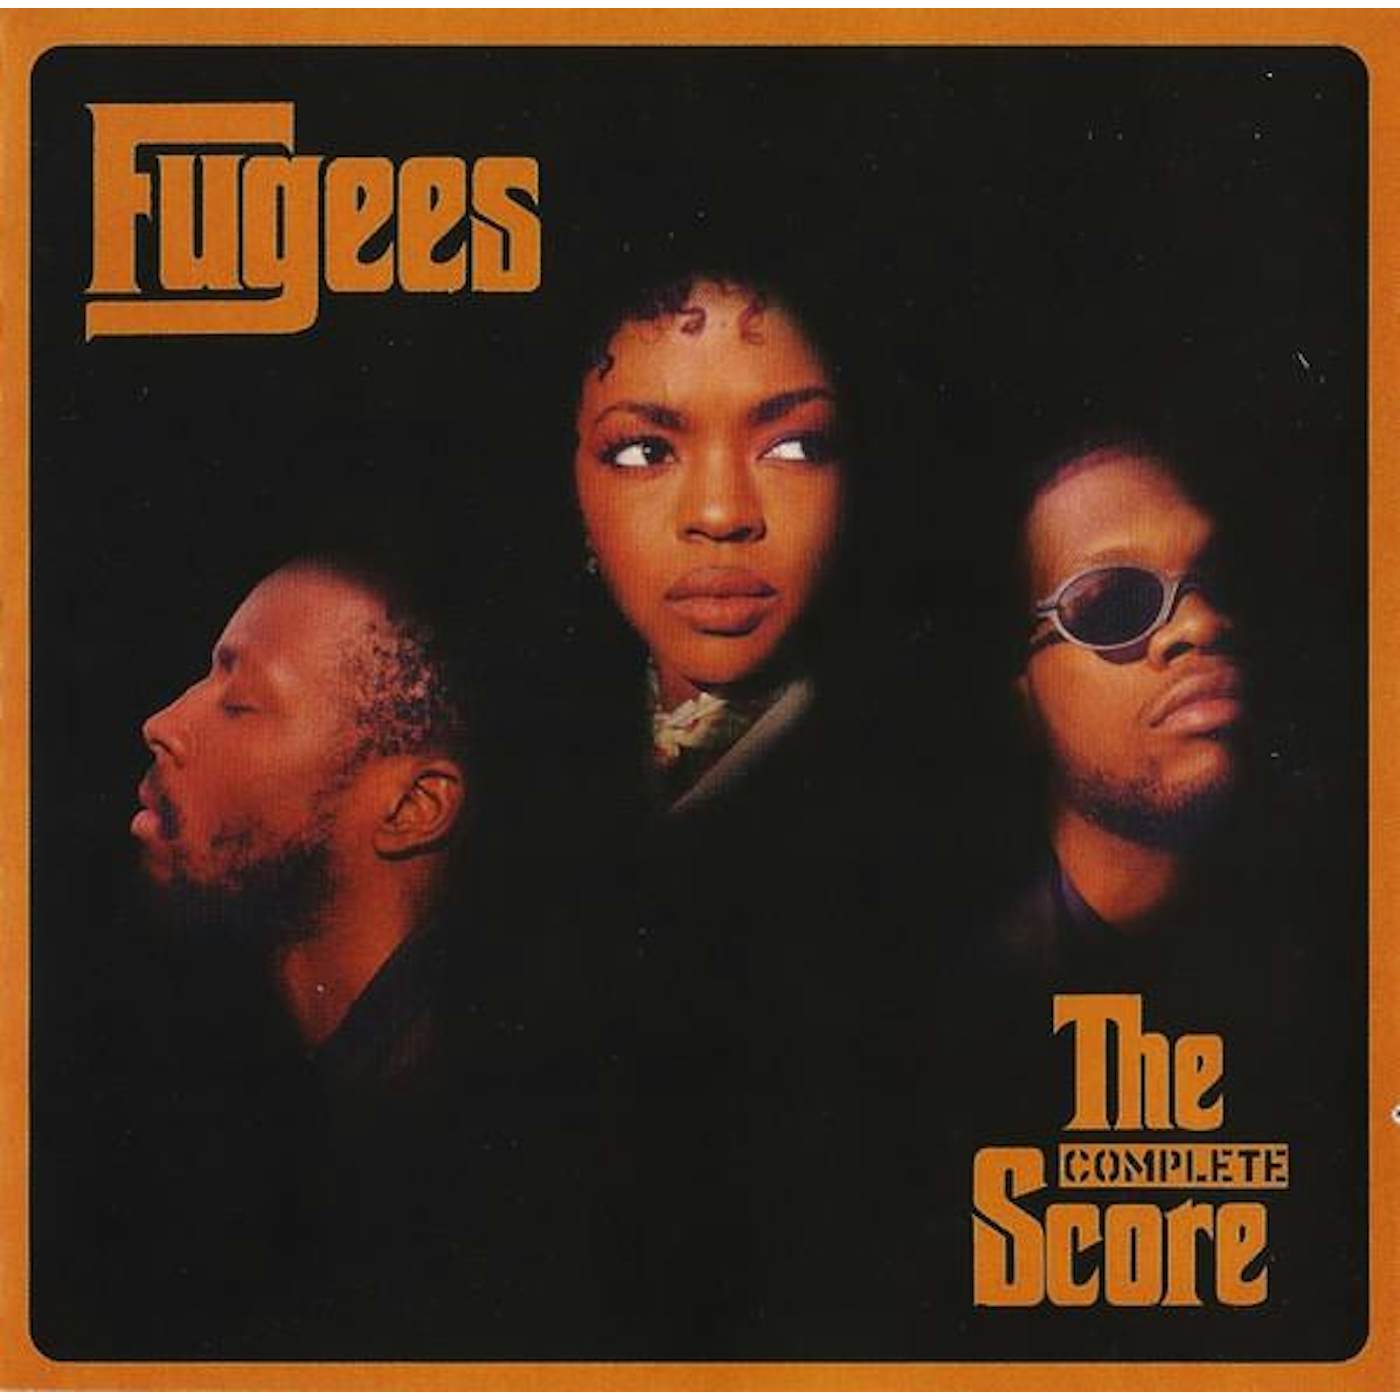 Fugees COMPLETE SCORE CD